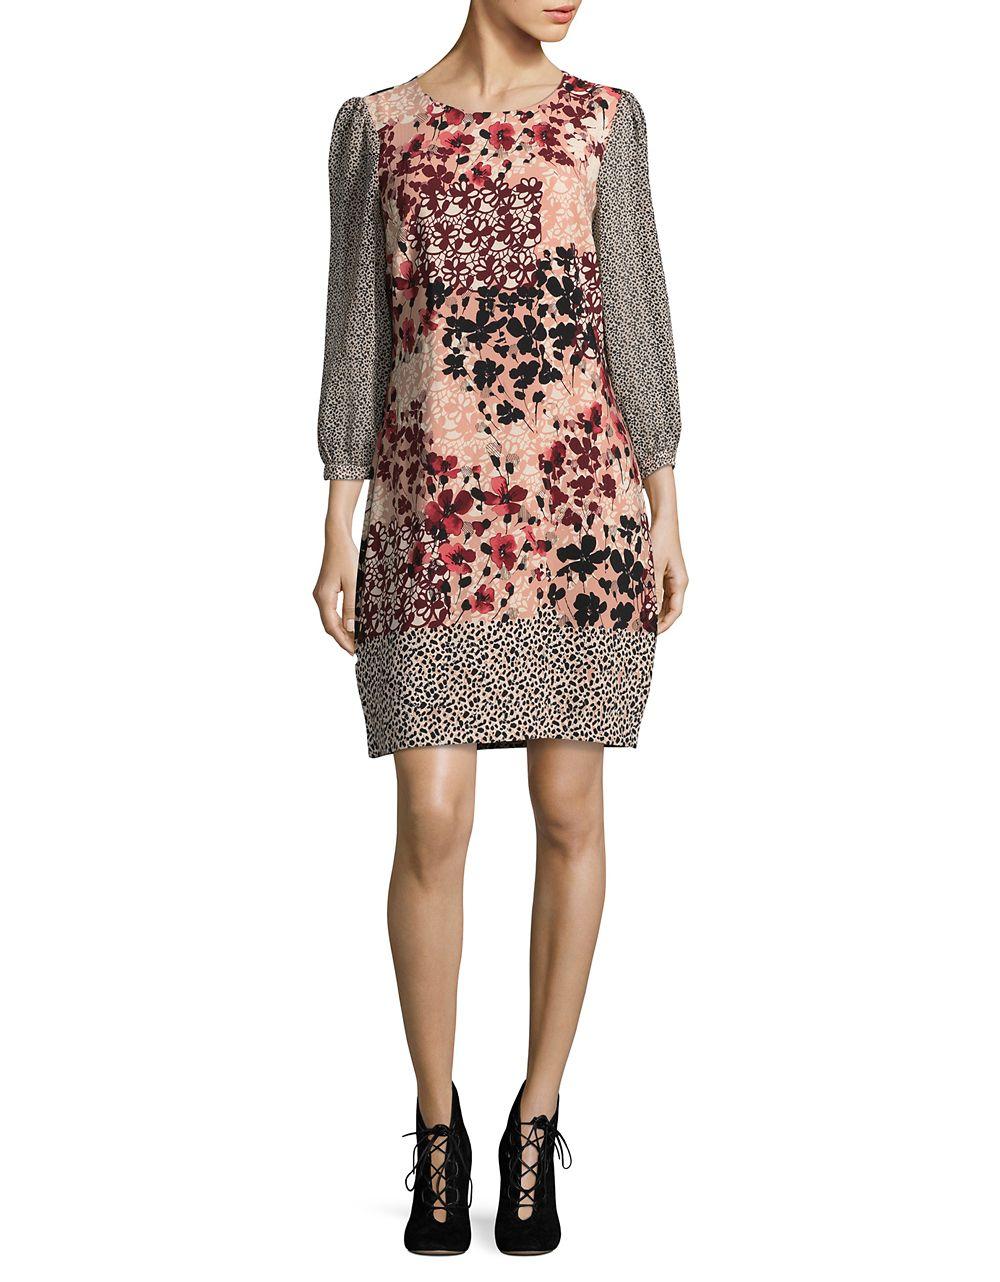 Lyst - Karl Lagerfeld Floral Shift Dress in Pink